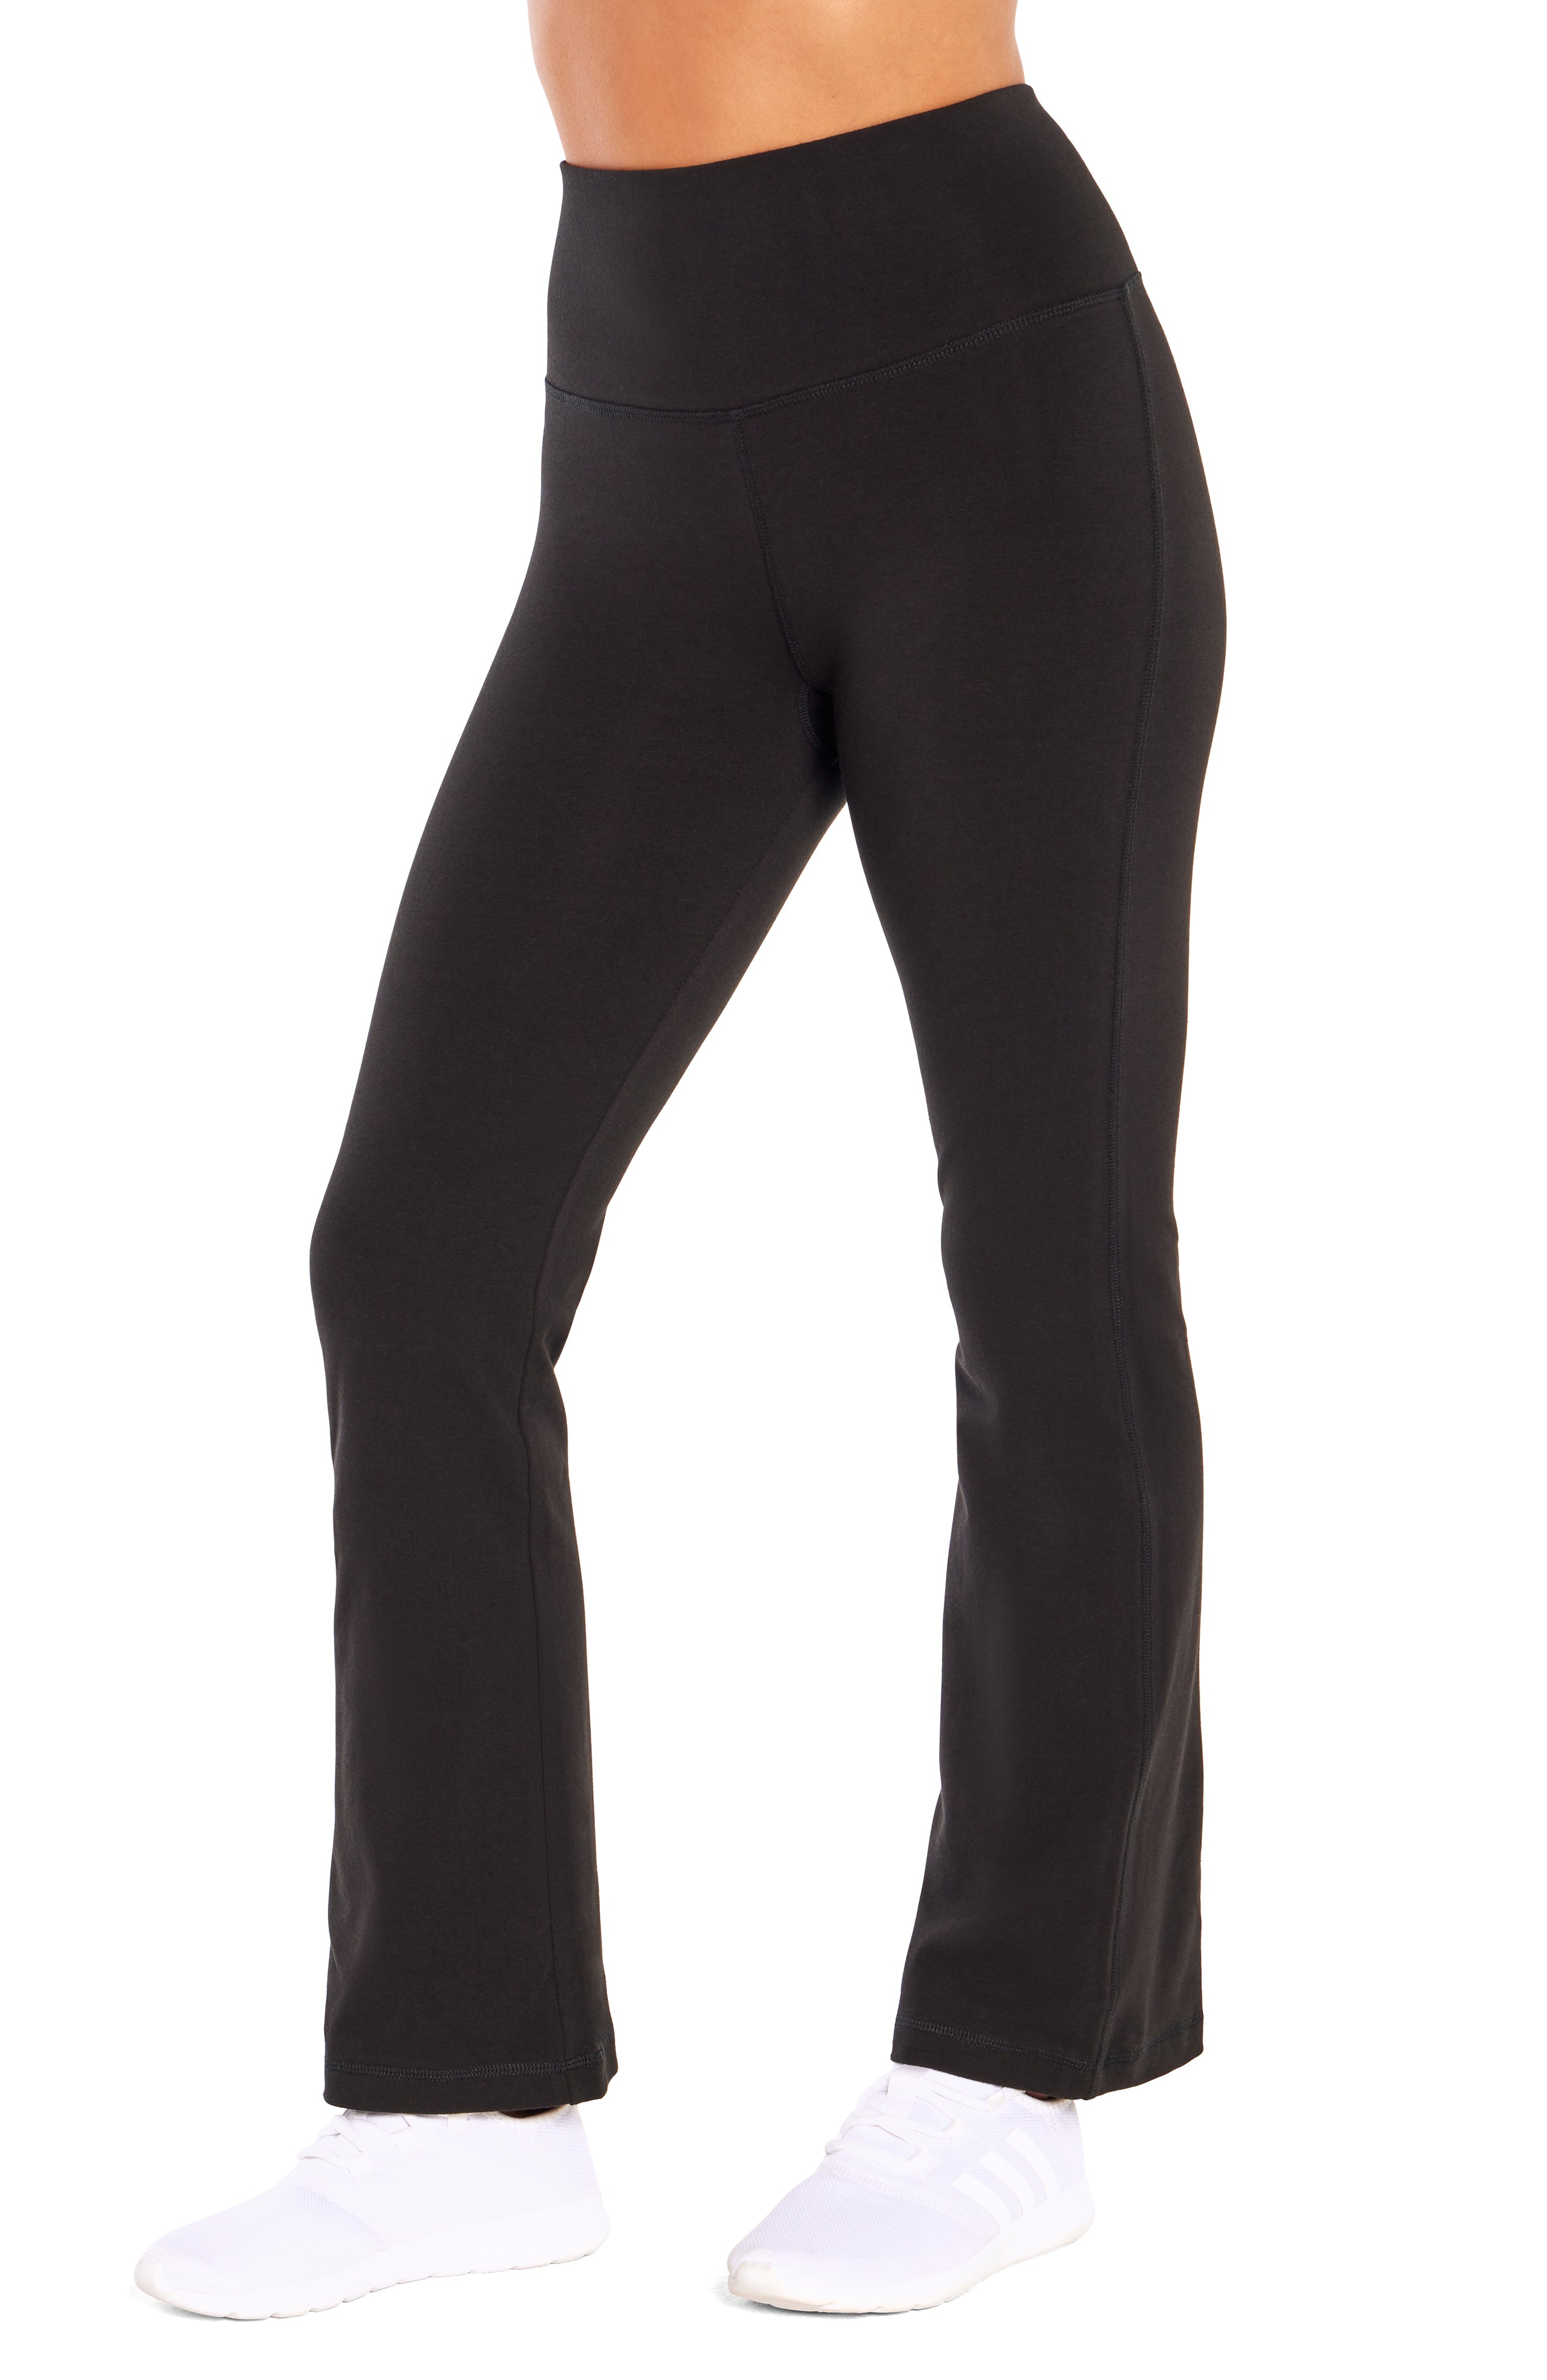 Women's - Mountain Elevated Flare Jogger in Black